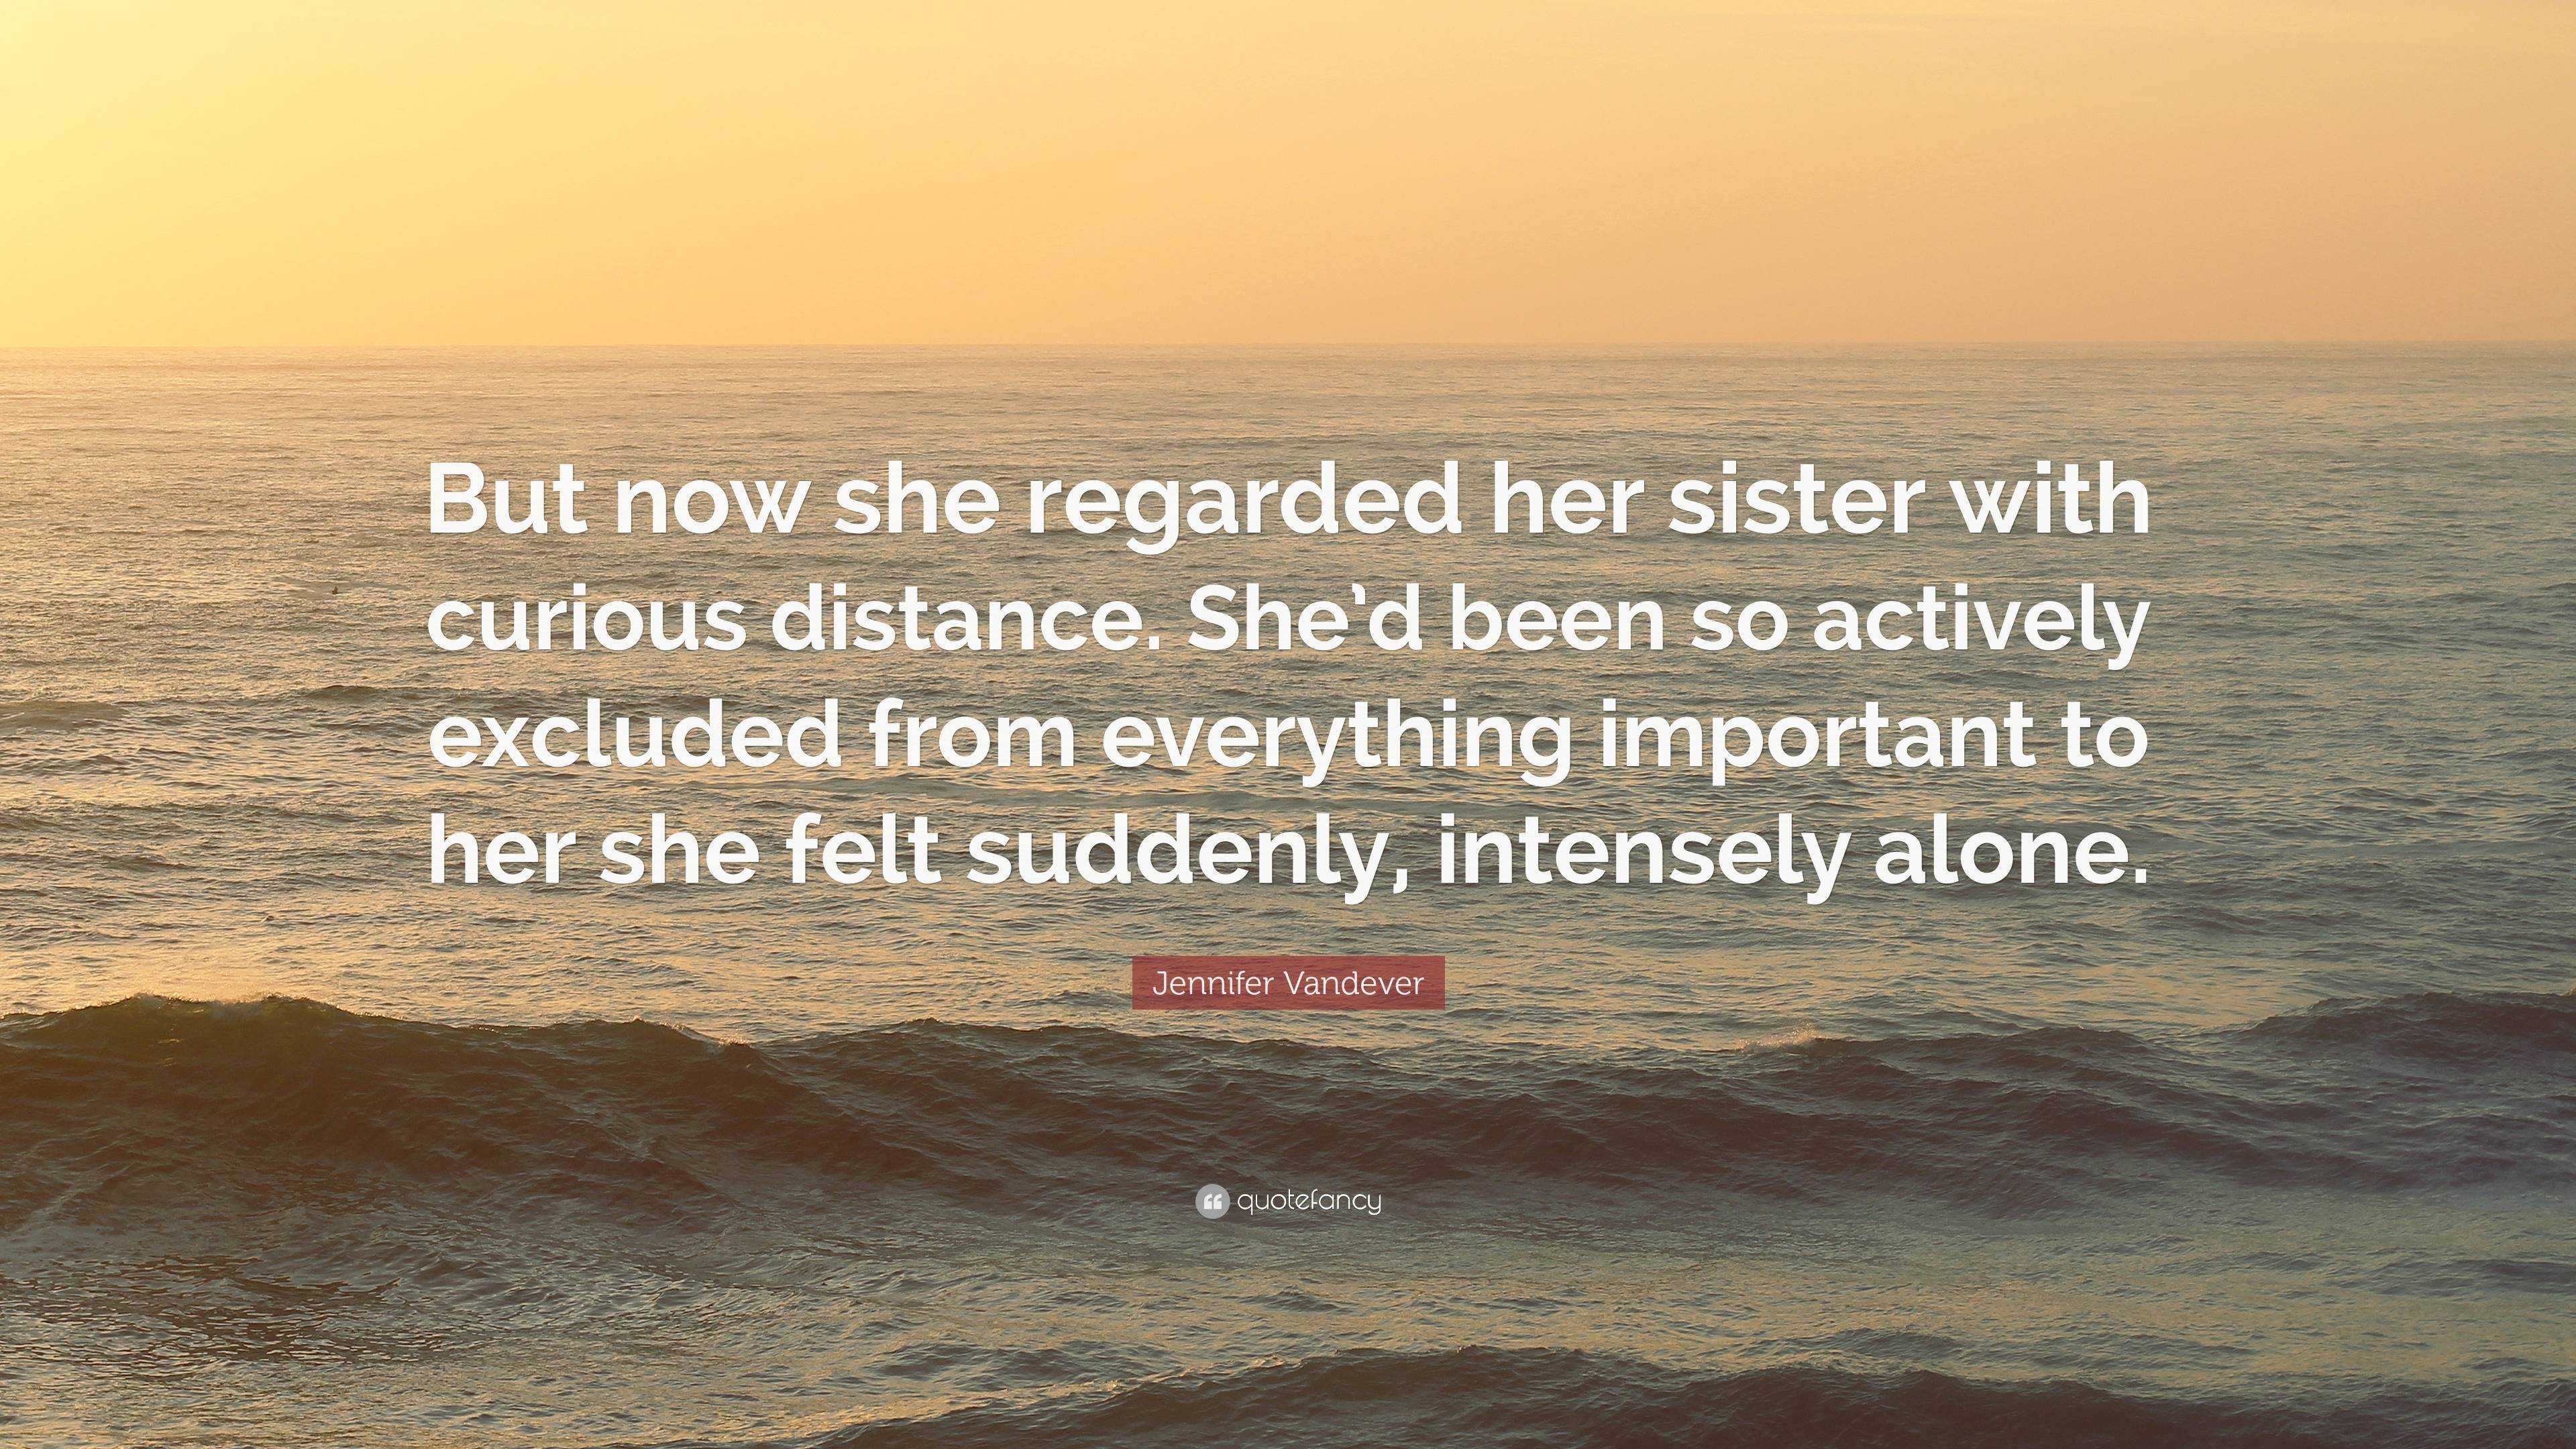 Jennifer Vandever Quote: “But now she regarded her sister with curious ...